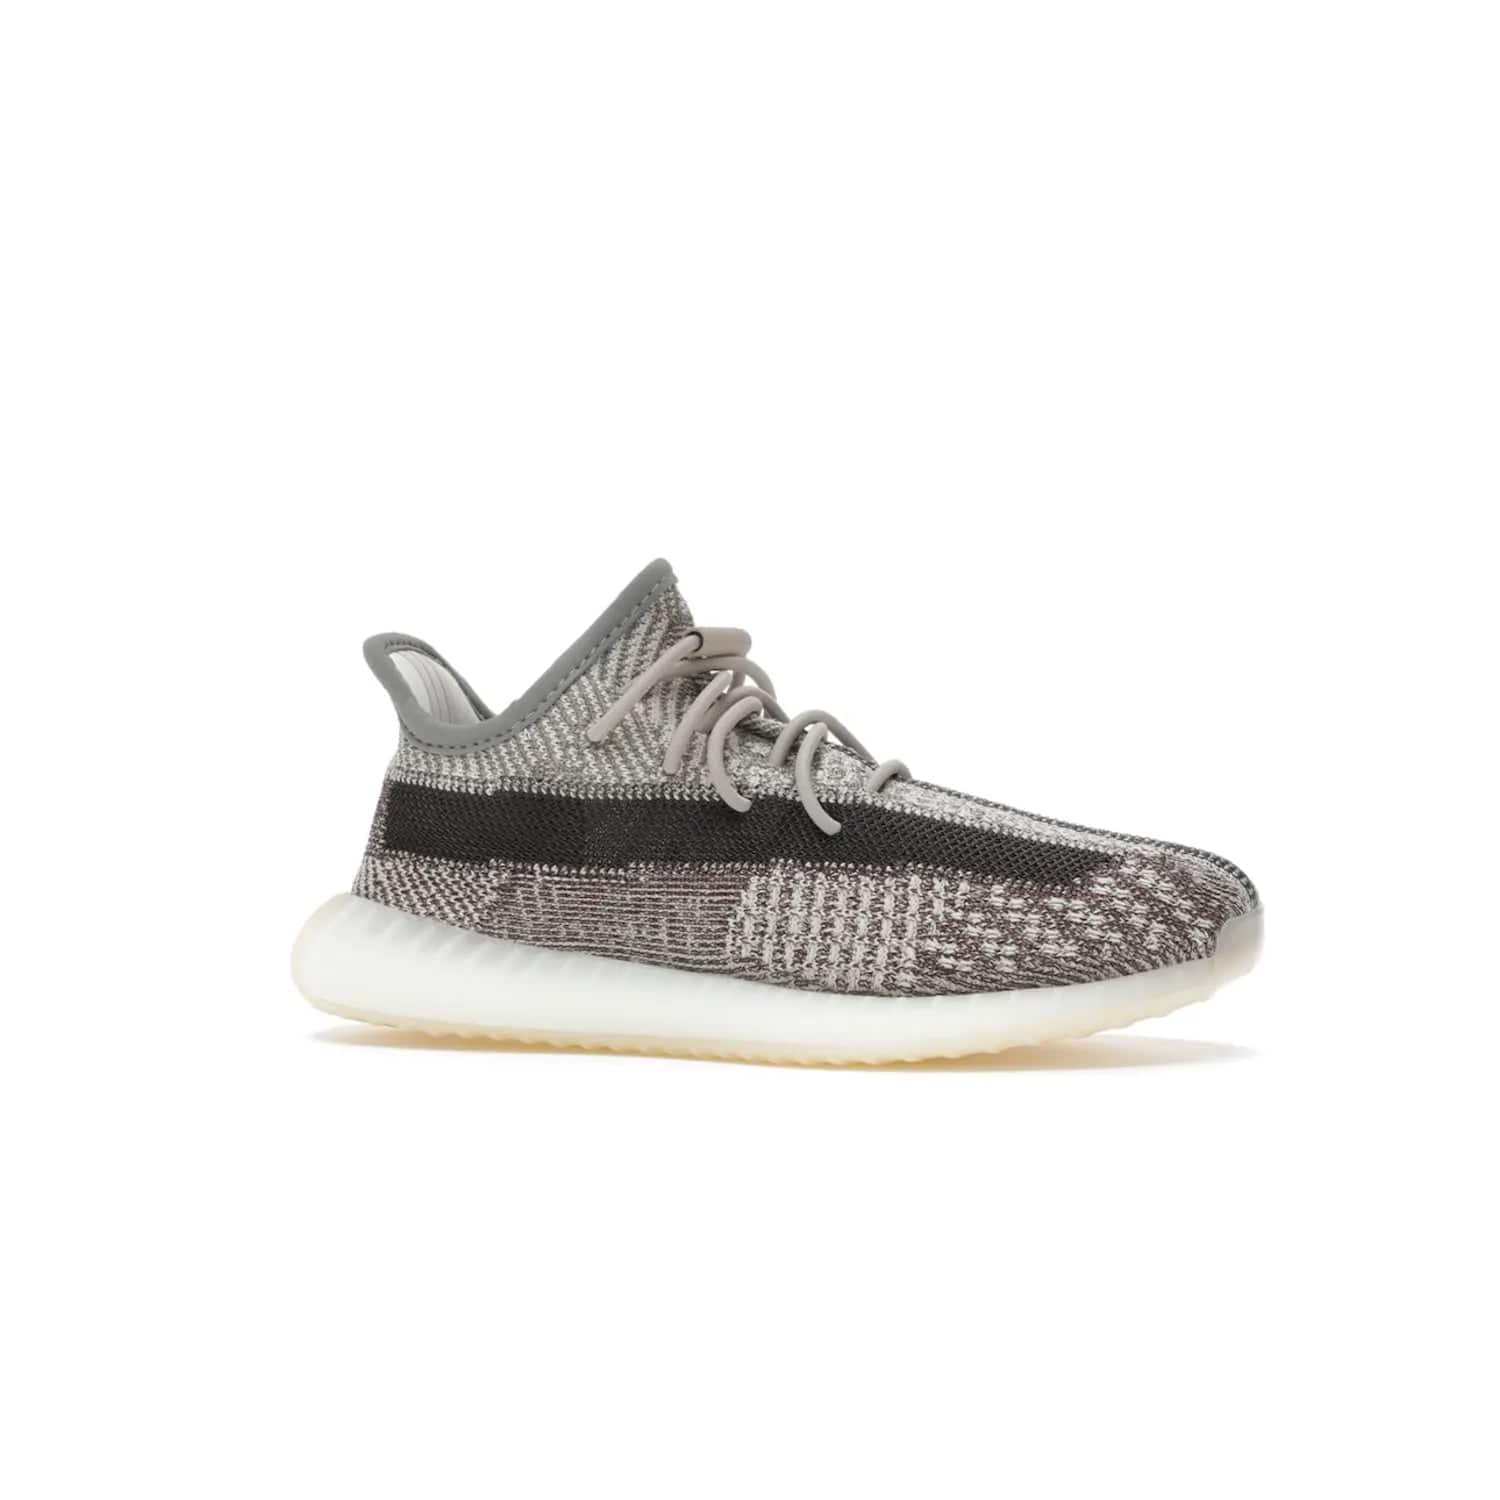 adidas Yeezy Boost 350 V2 Zyon (Kids) - Image 3 - Only at www.BallersClubKickz.com - The adidas Yeezy Boost 350 V2 Zyon (Kids) - perfect pick for fashion-savvy kids. Features soft Primeknit upper, lace closure & colorful patterning. Comfort & style for kids' summer outfits!